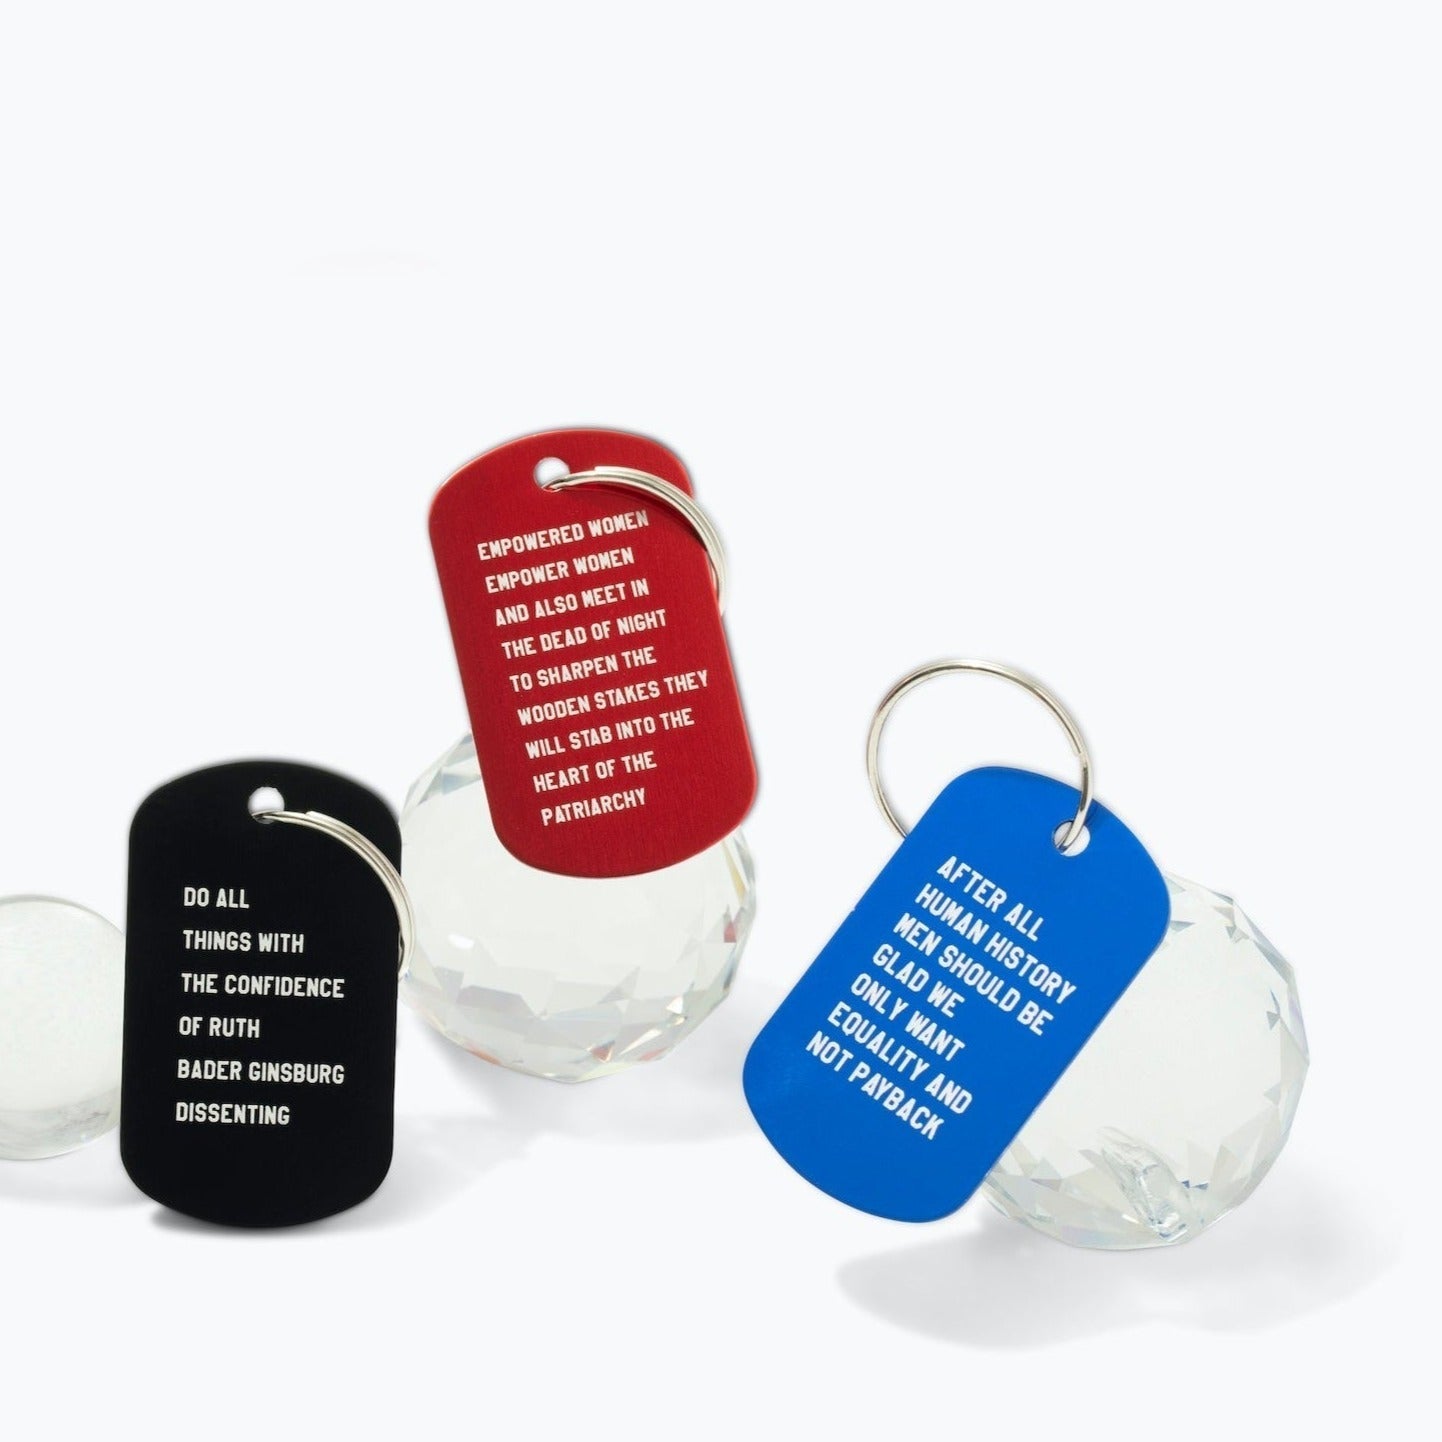 After All Human History Men Should Be Glad We Only Want Equality and Not Payback Dog Tag Keychain in Blue (Laser Engraved)